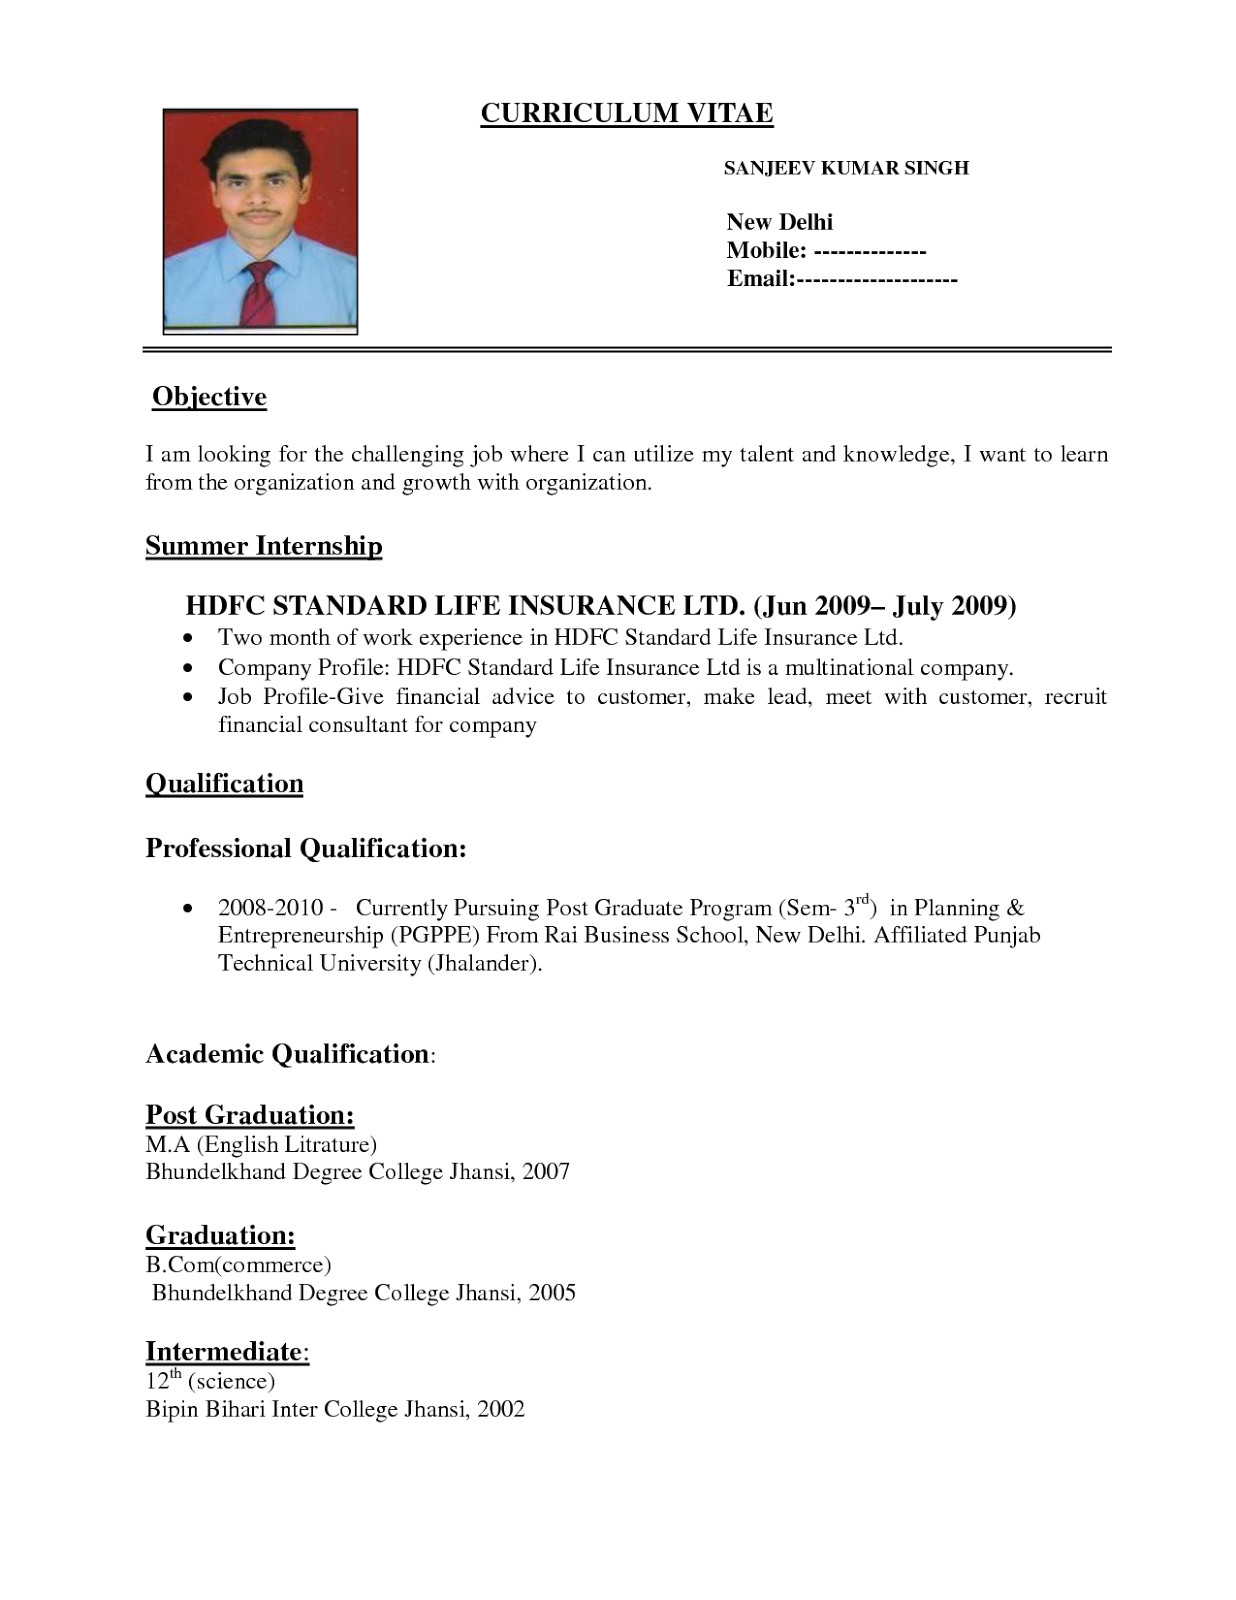 download resume format write the best resume